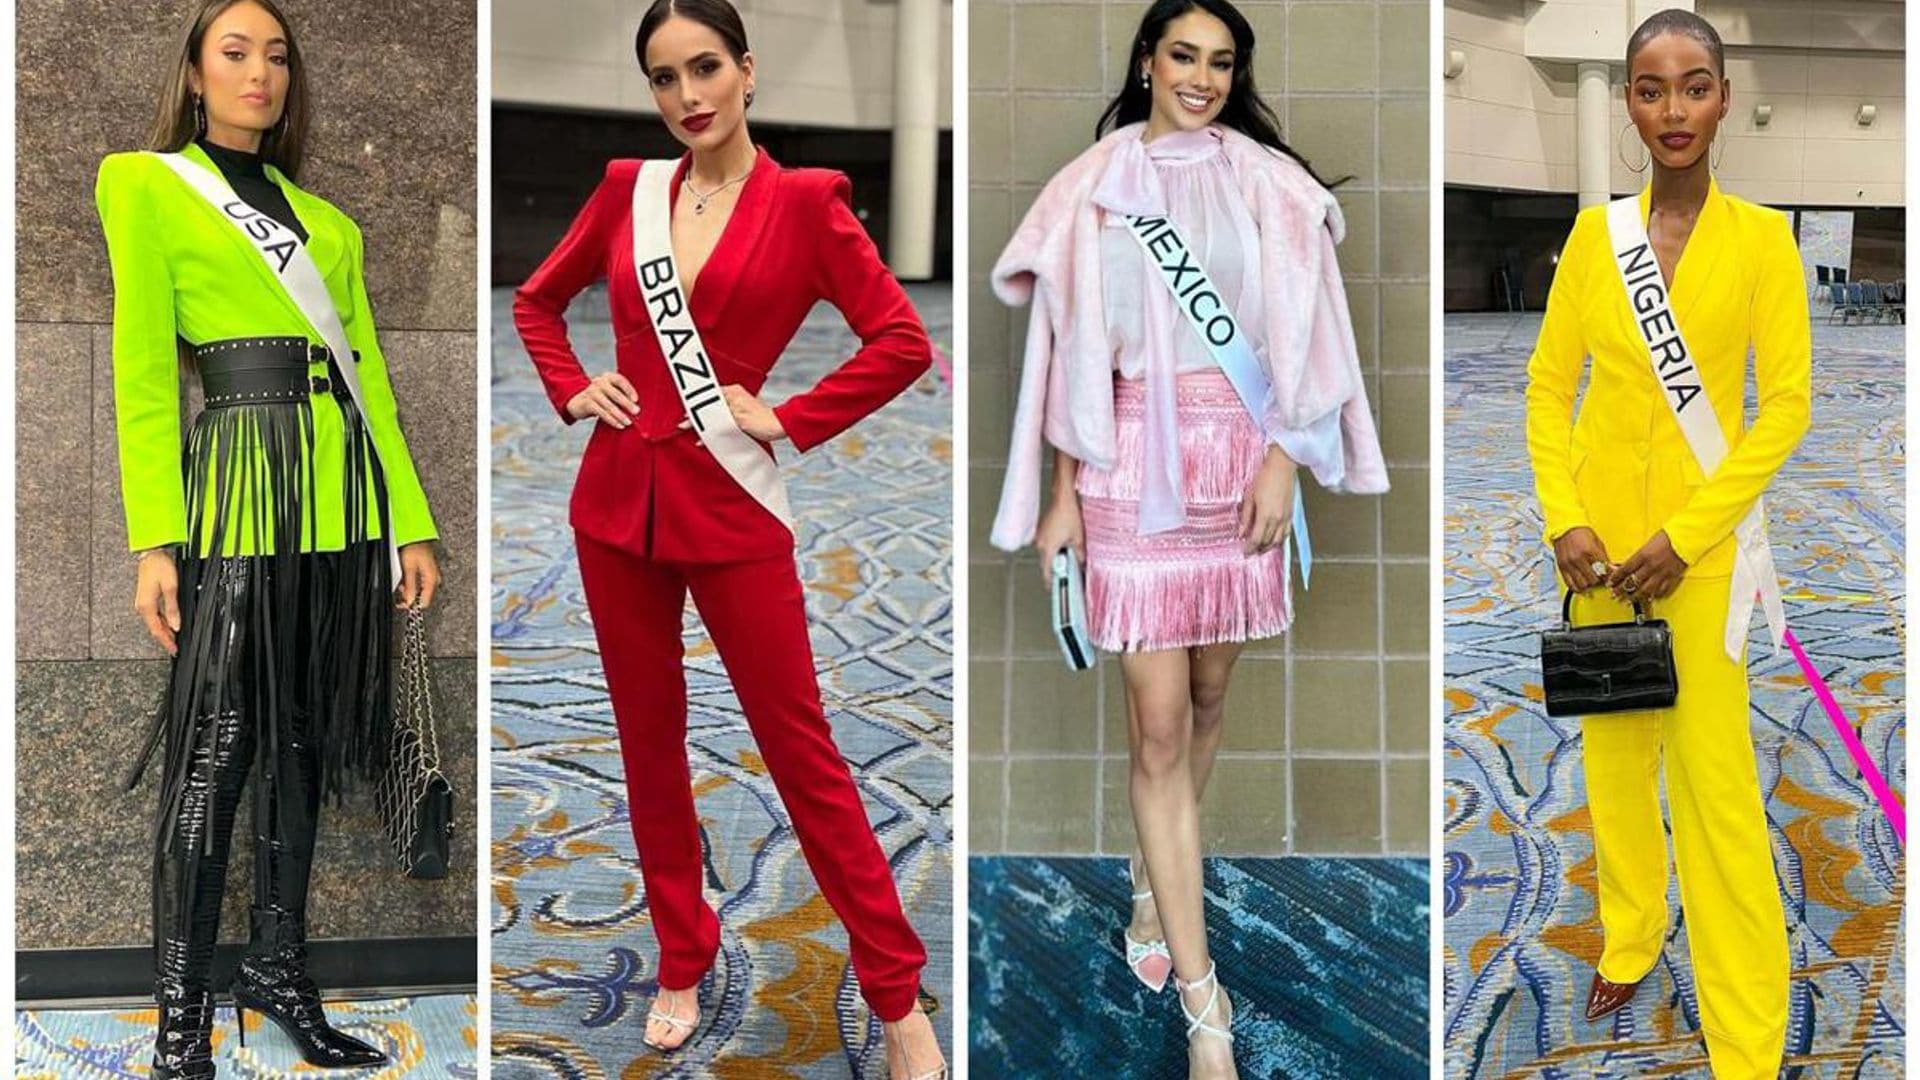 Meet the top 10 favorites to win Miss Universe, according to Andrea Meza